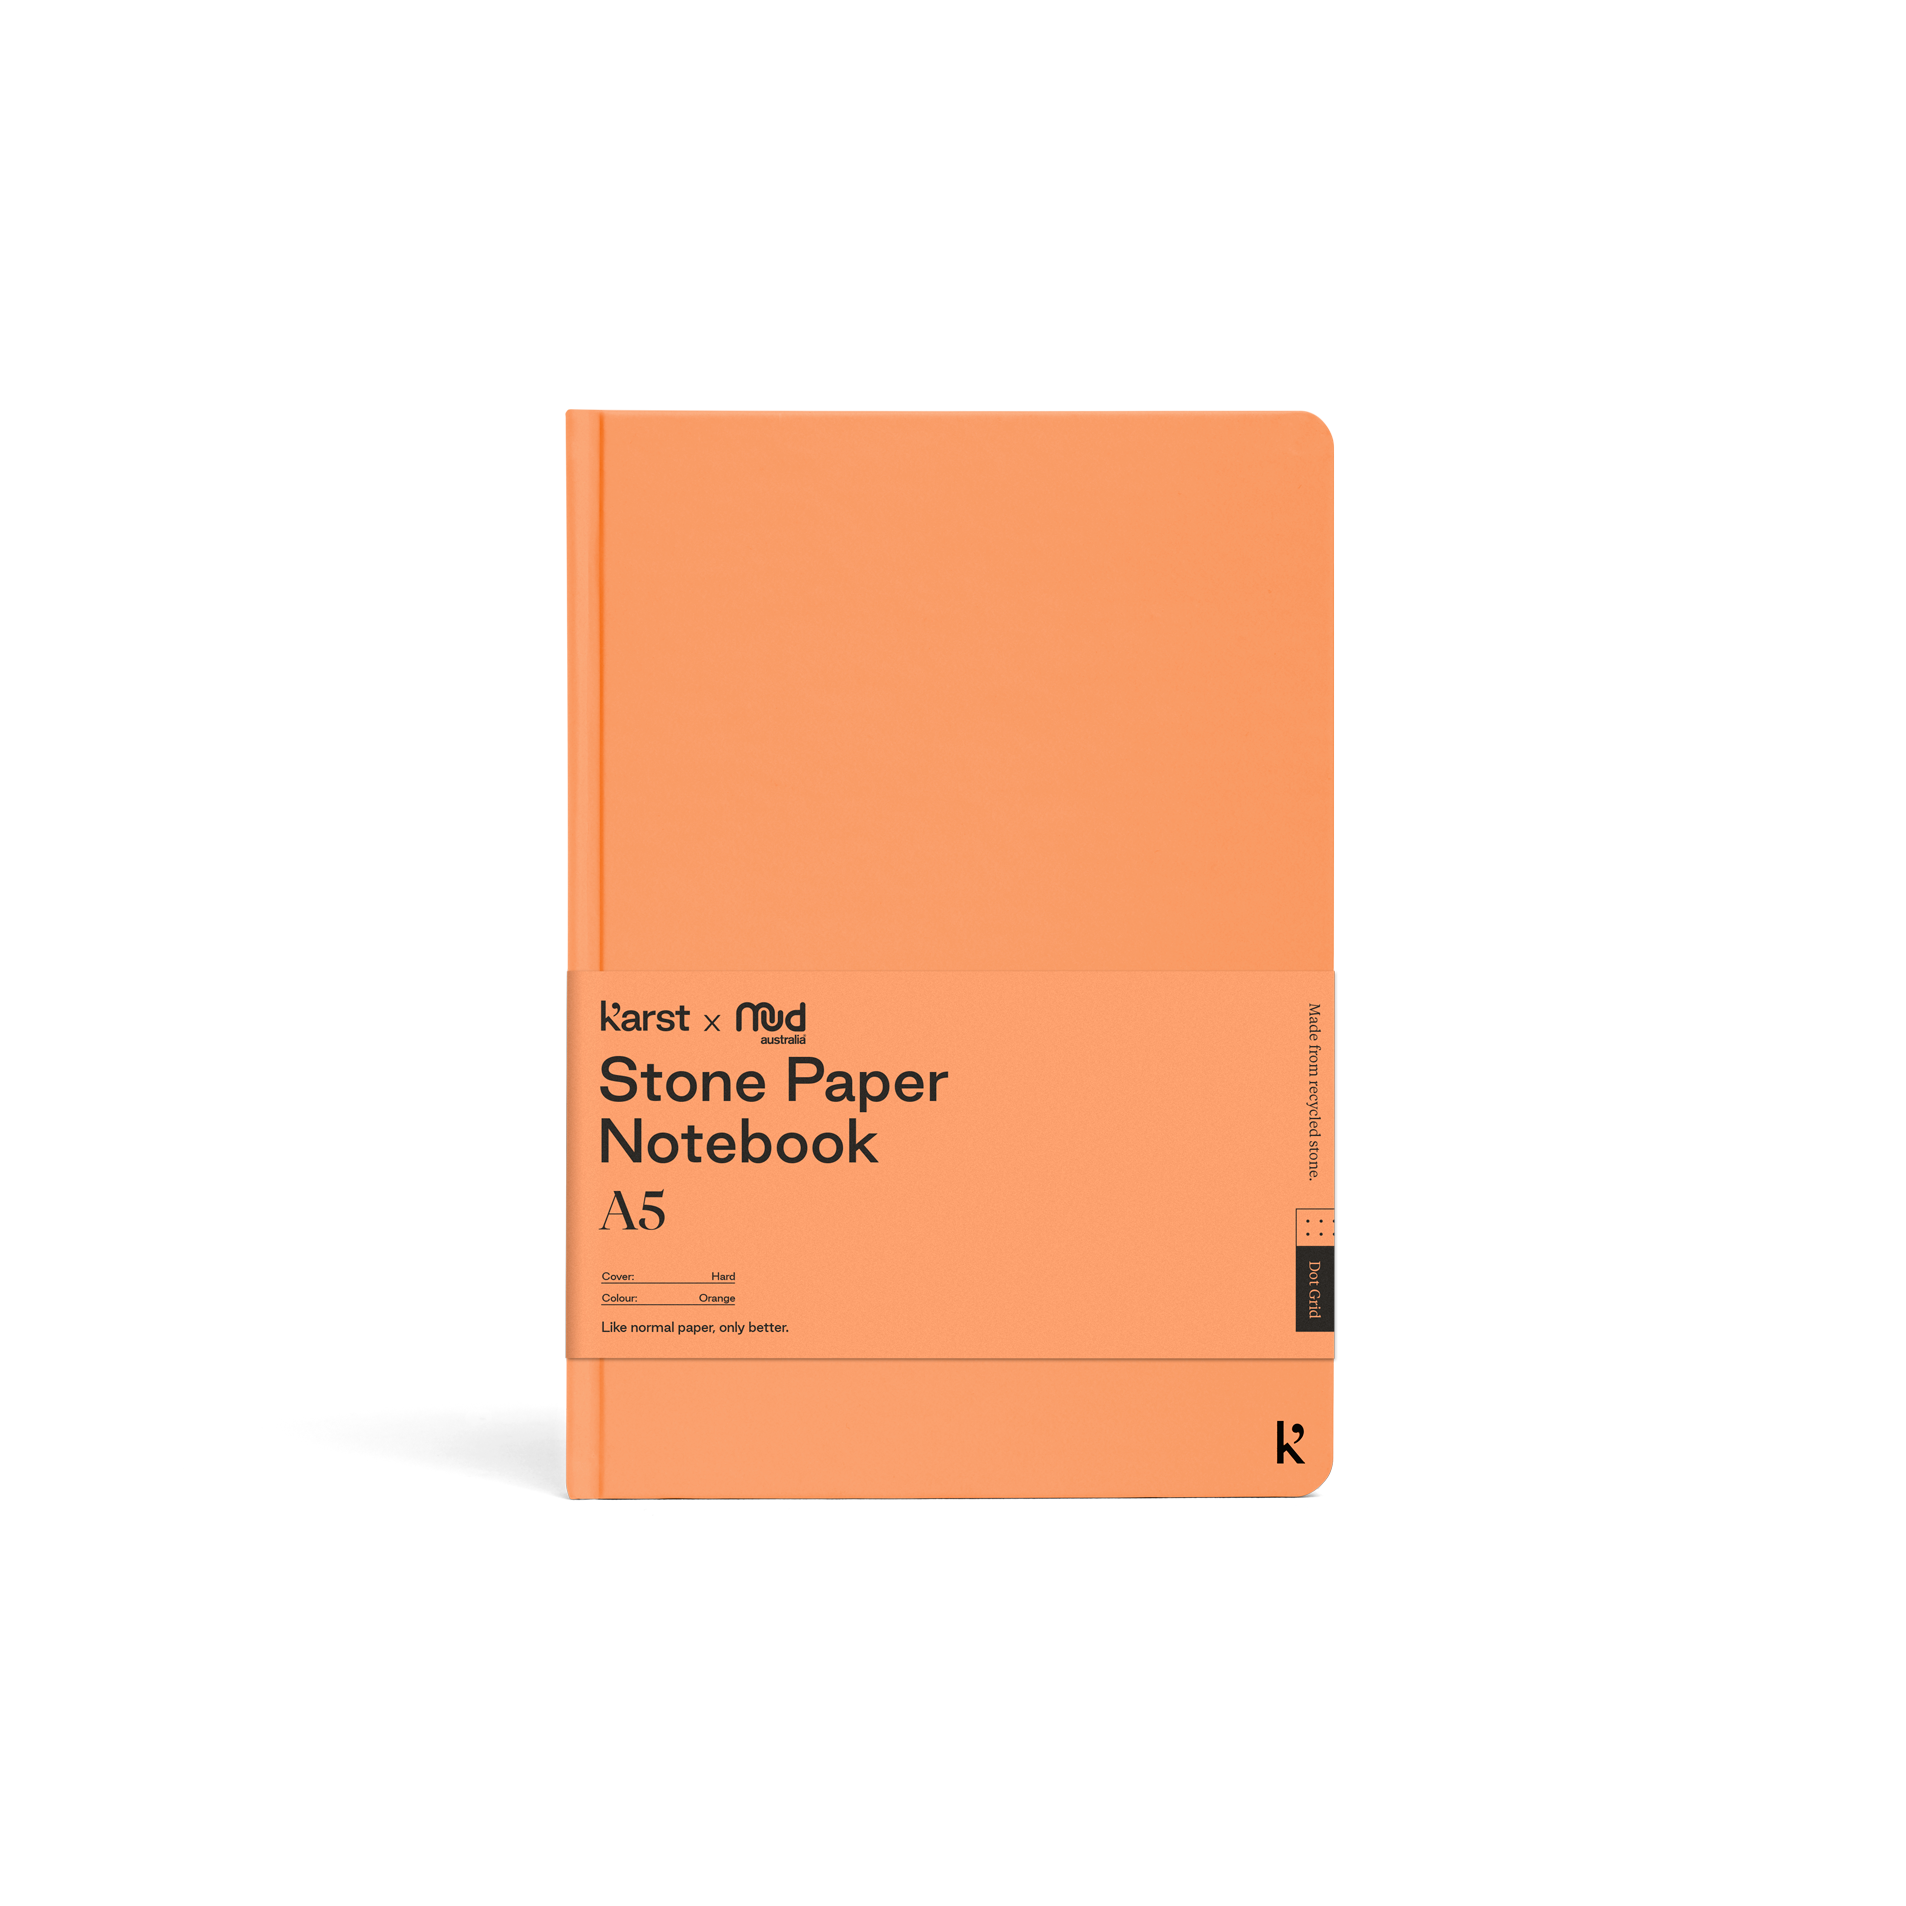 Karst x Mud Notebook A5 (Limited Edition)